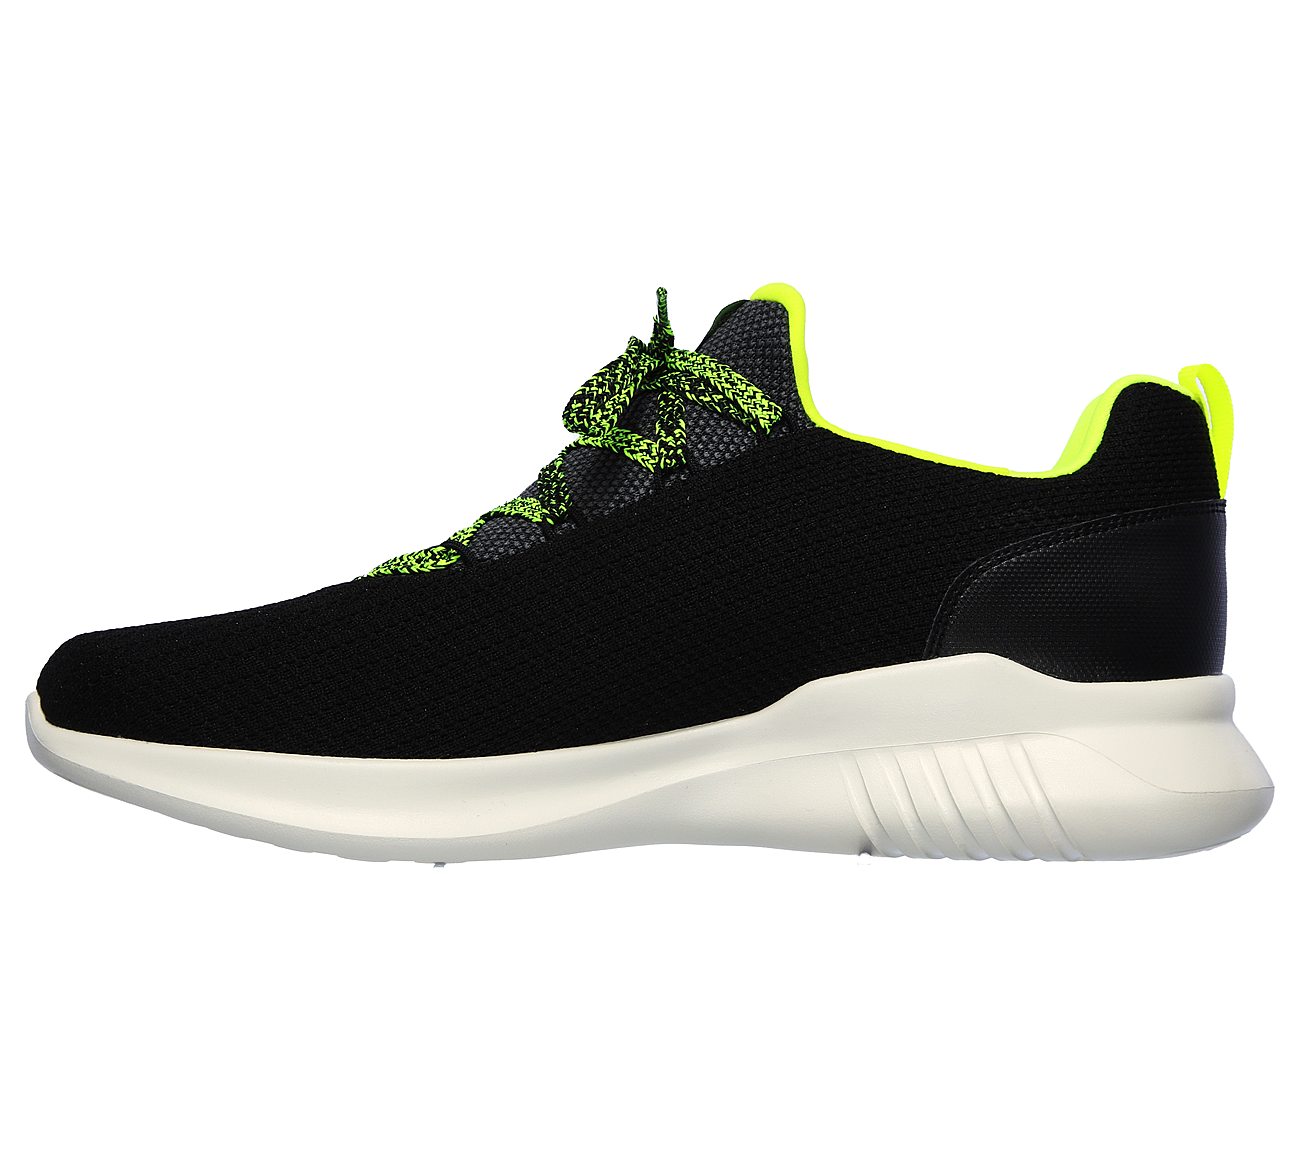 GO RUN MOJO 2.0 - LUCITE, BLACK/LIME Footwear Left View